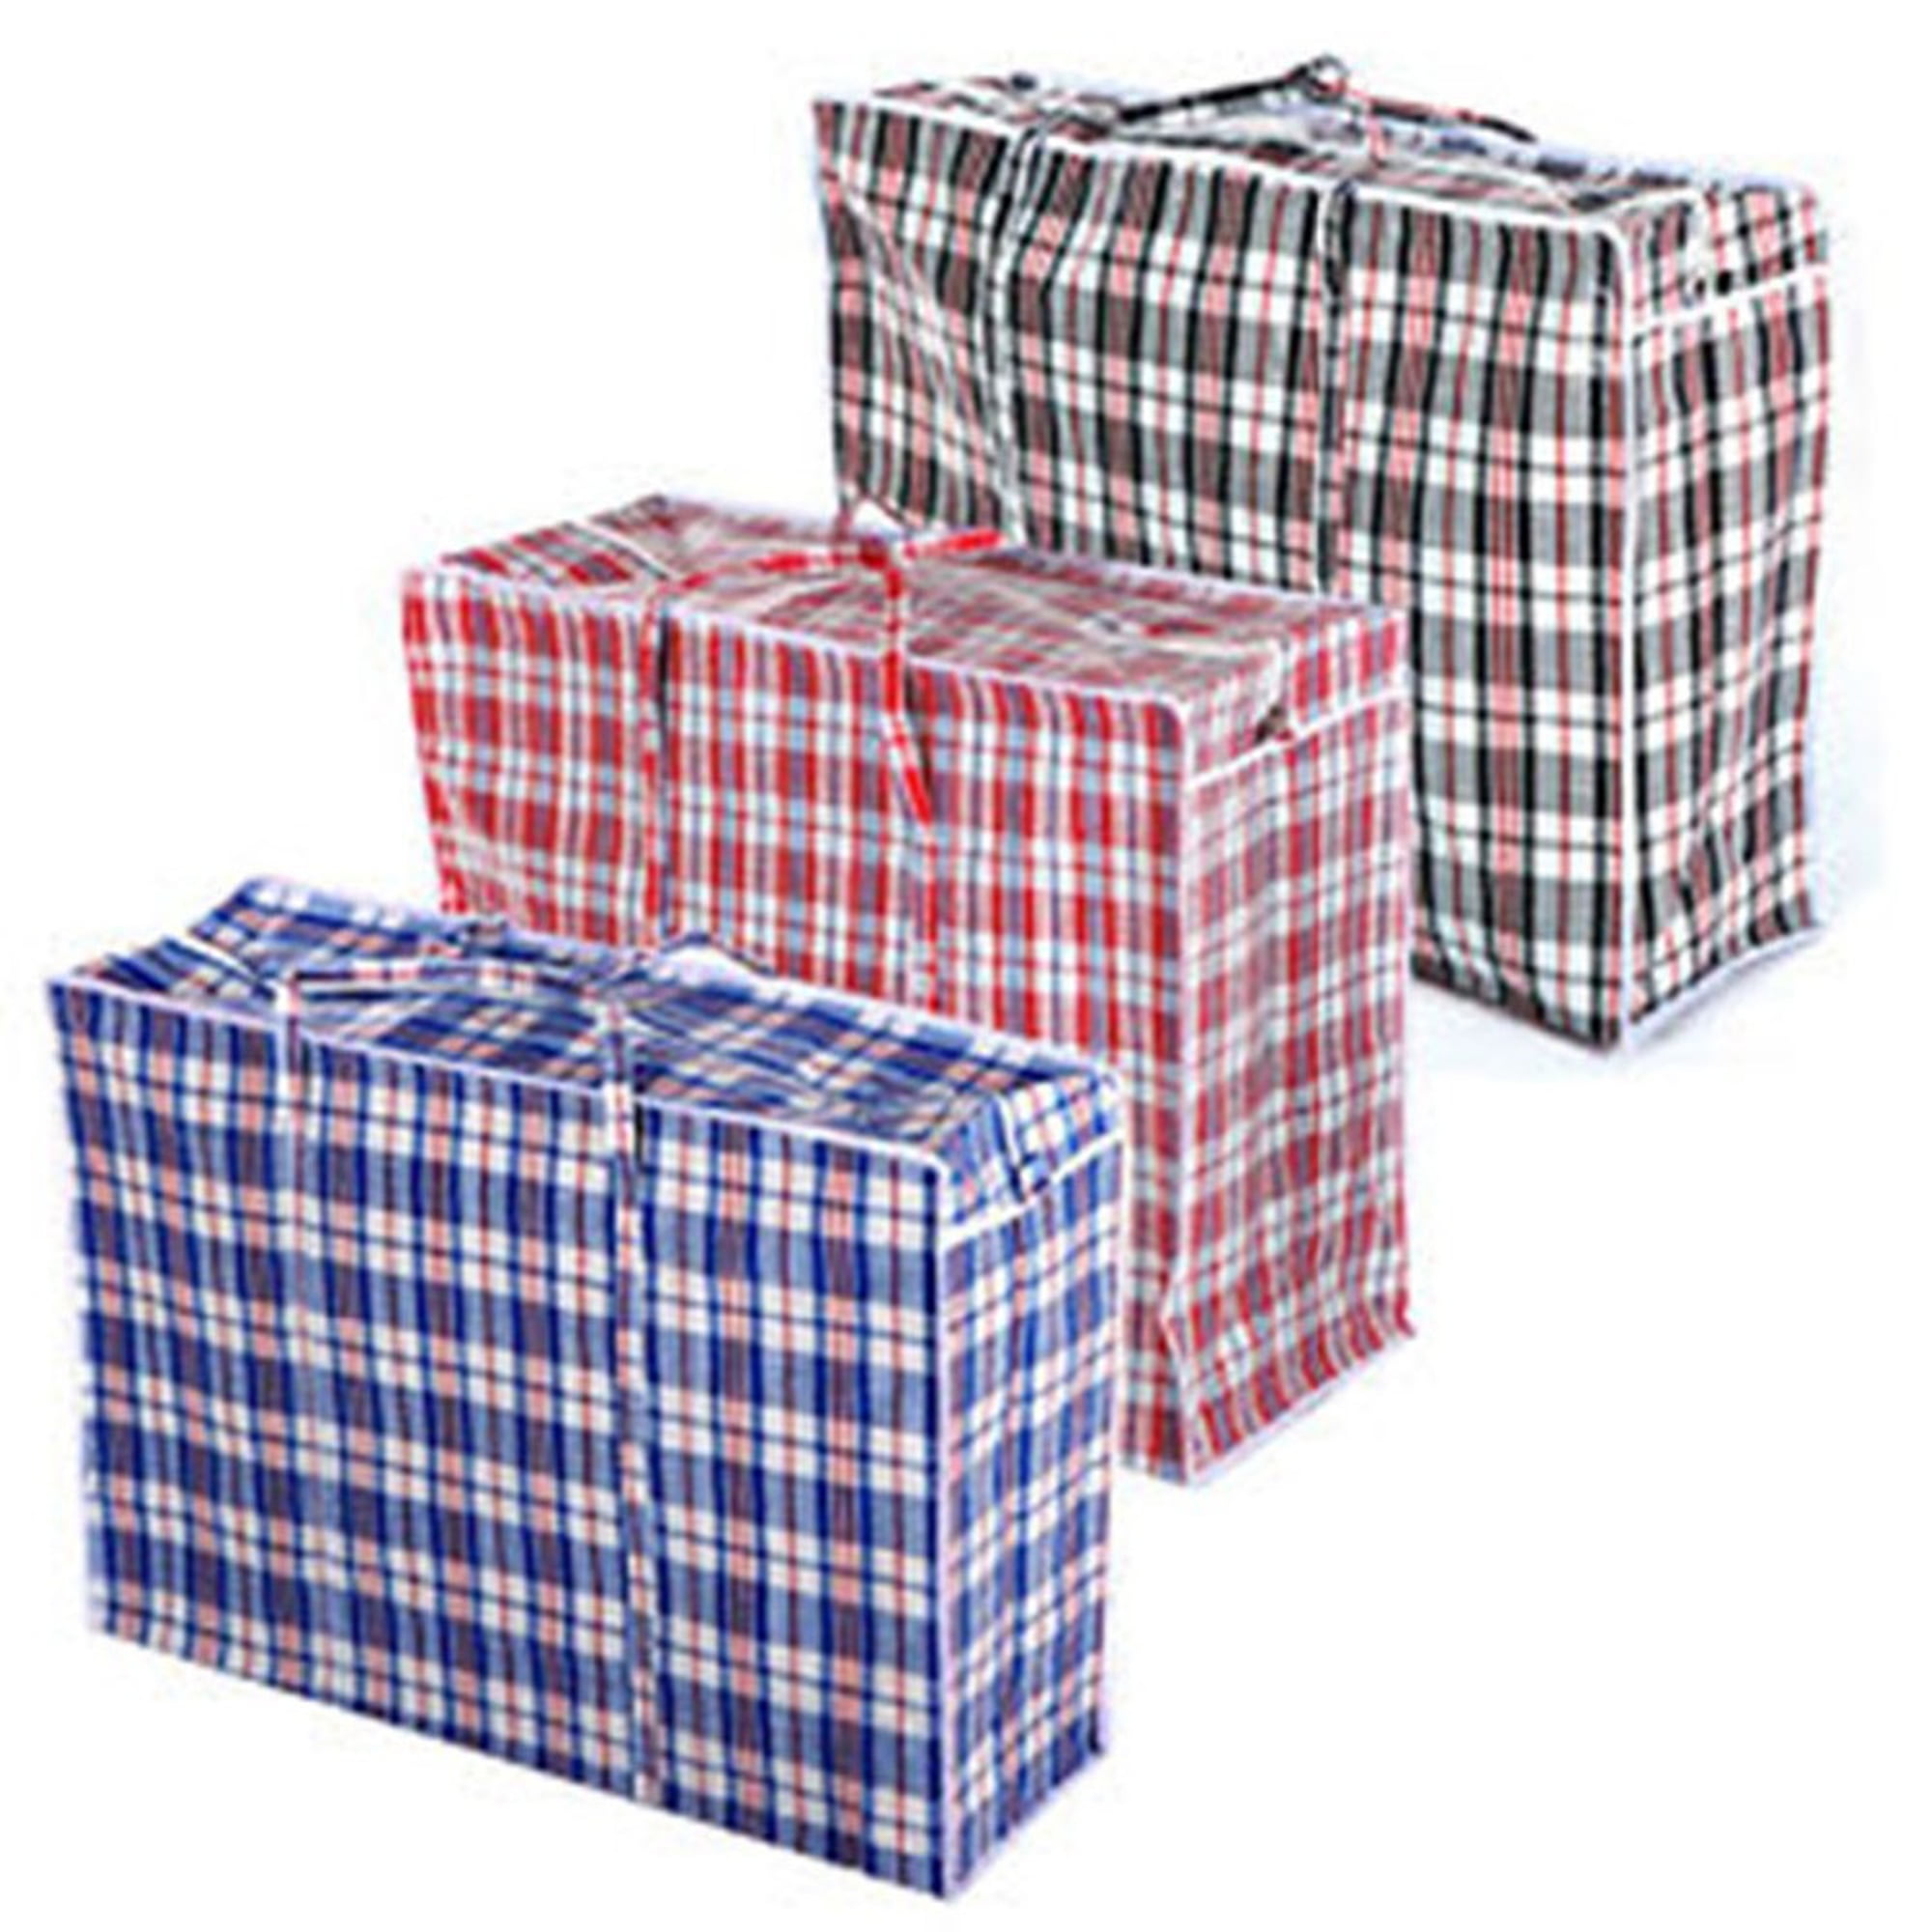 Details about  / Laundry Bags Jumbo Small Medium Laundry Bags With Zips Reusable Waterproof Cheap